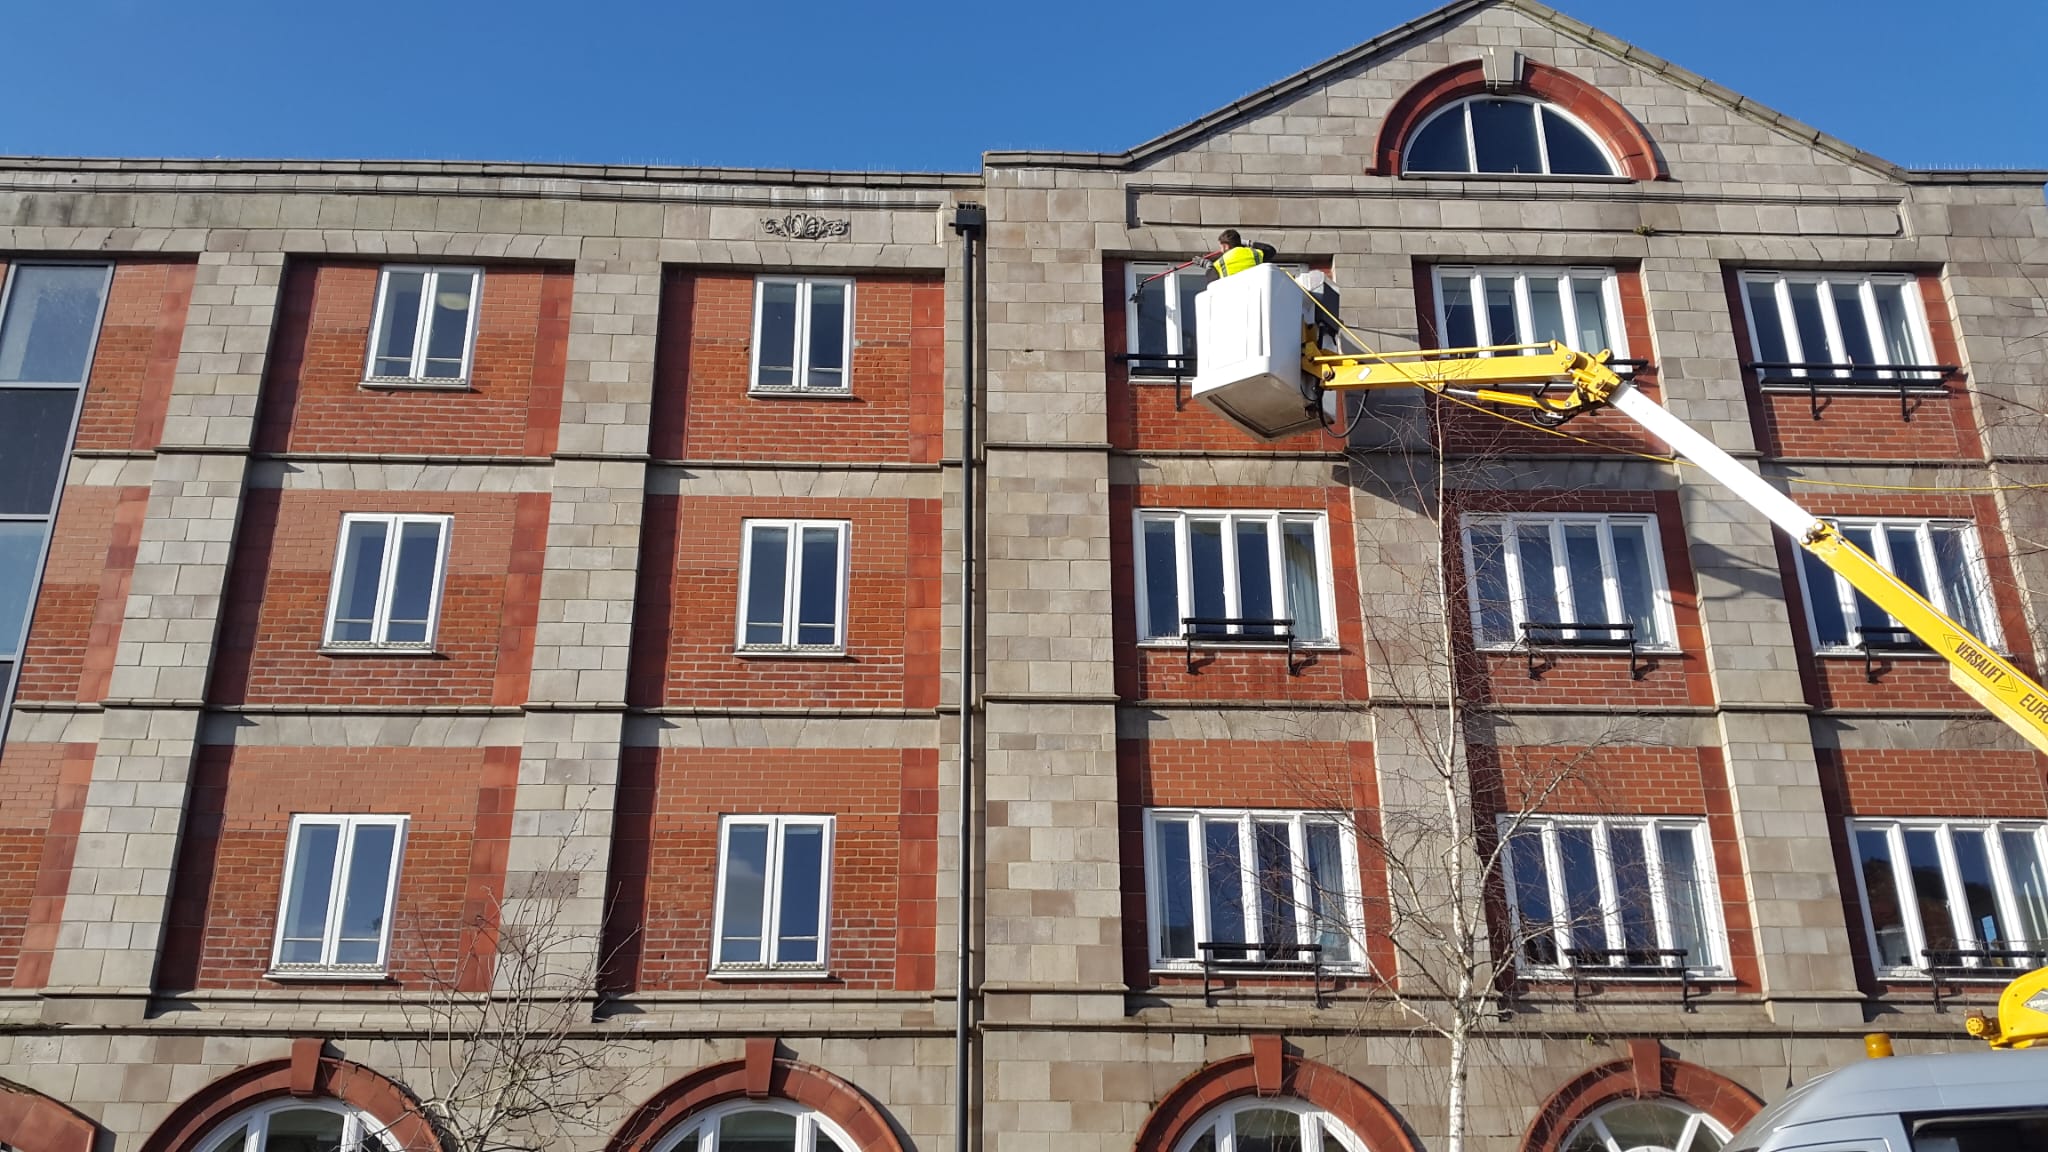 College building being washed by HighSpec window cleaners using a crane